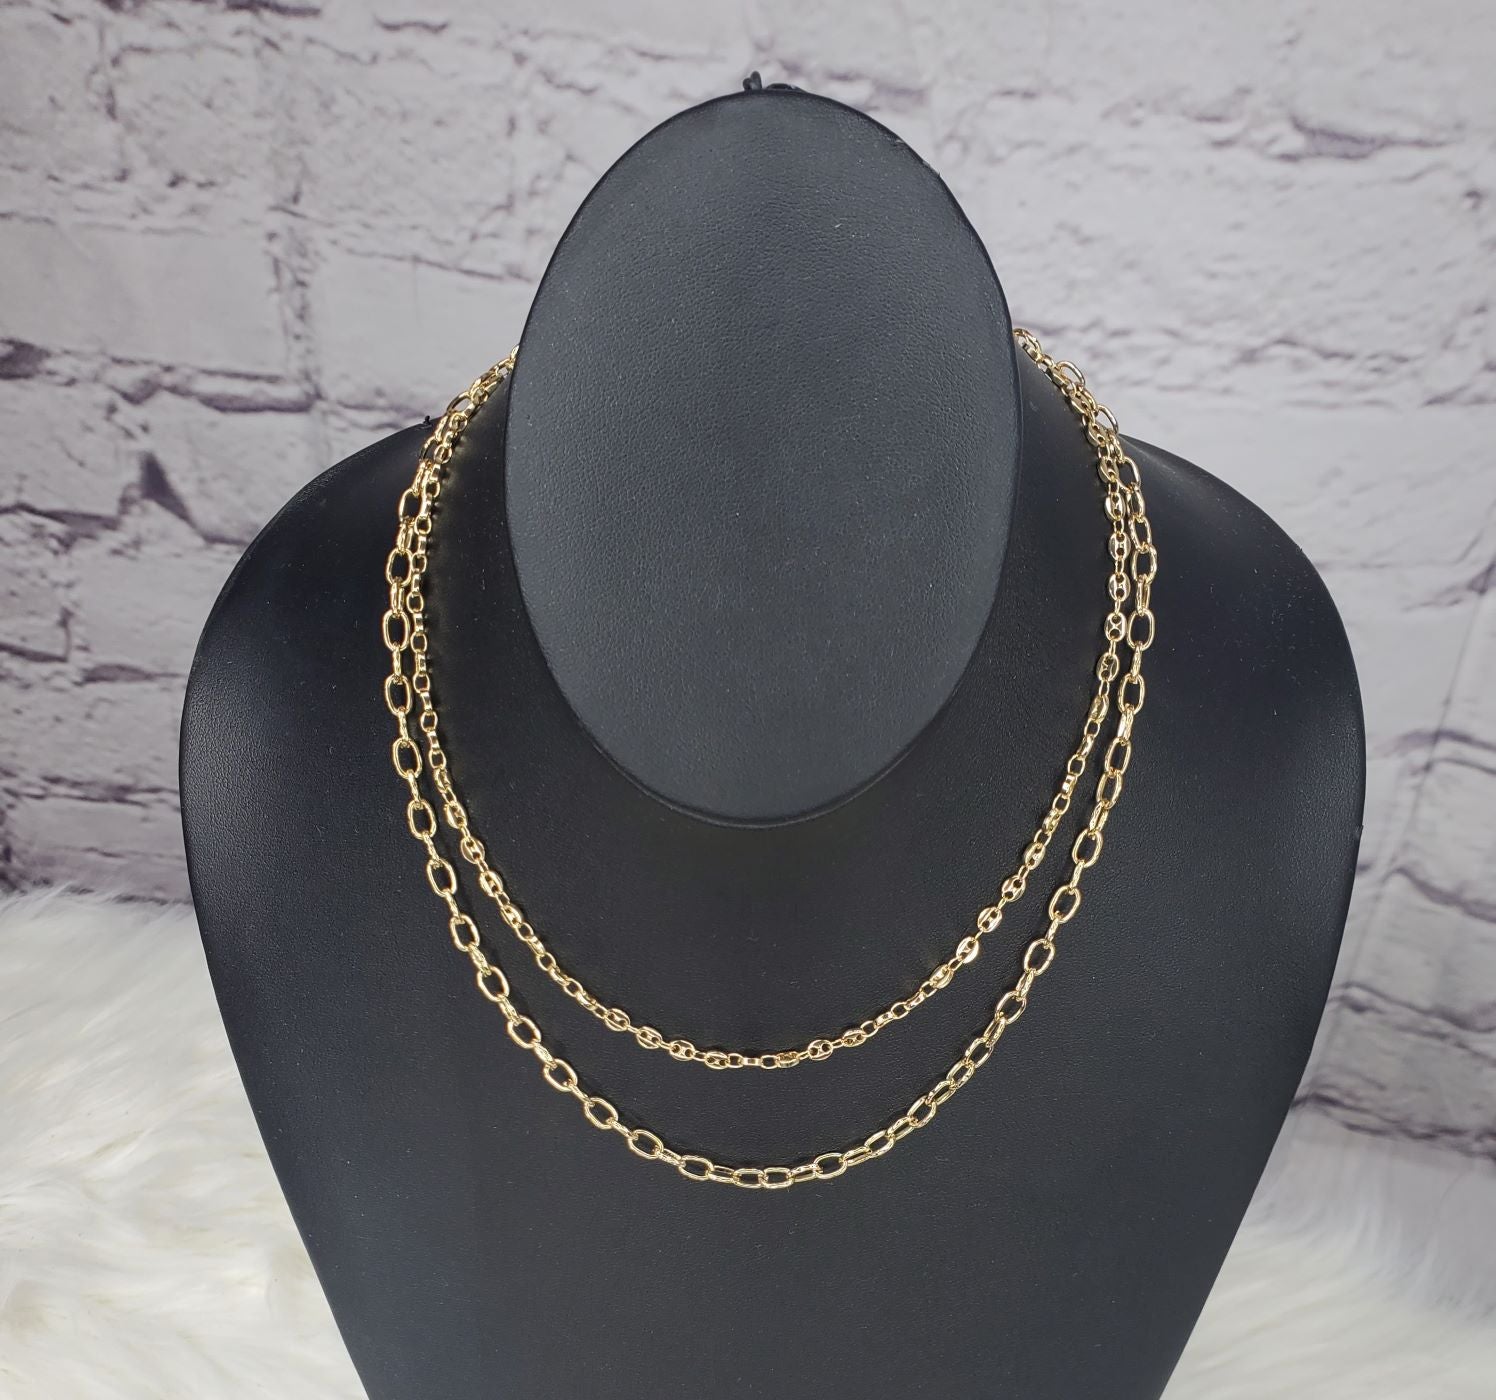 Euro Collection layered decorative chain necklace